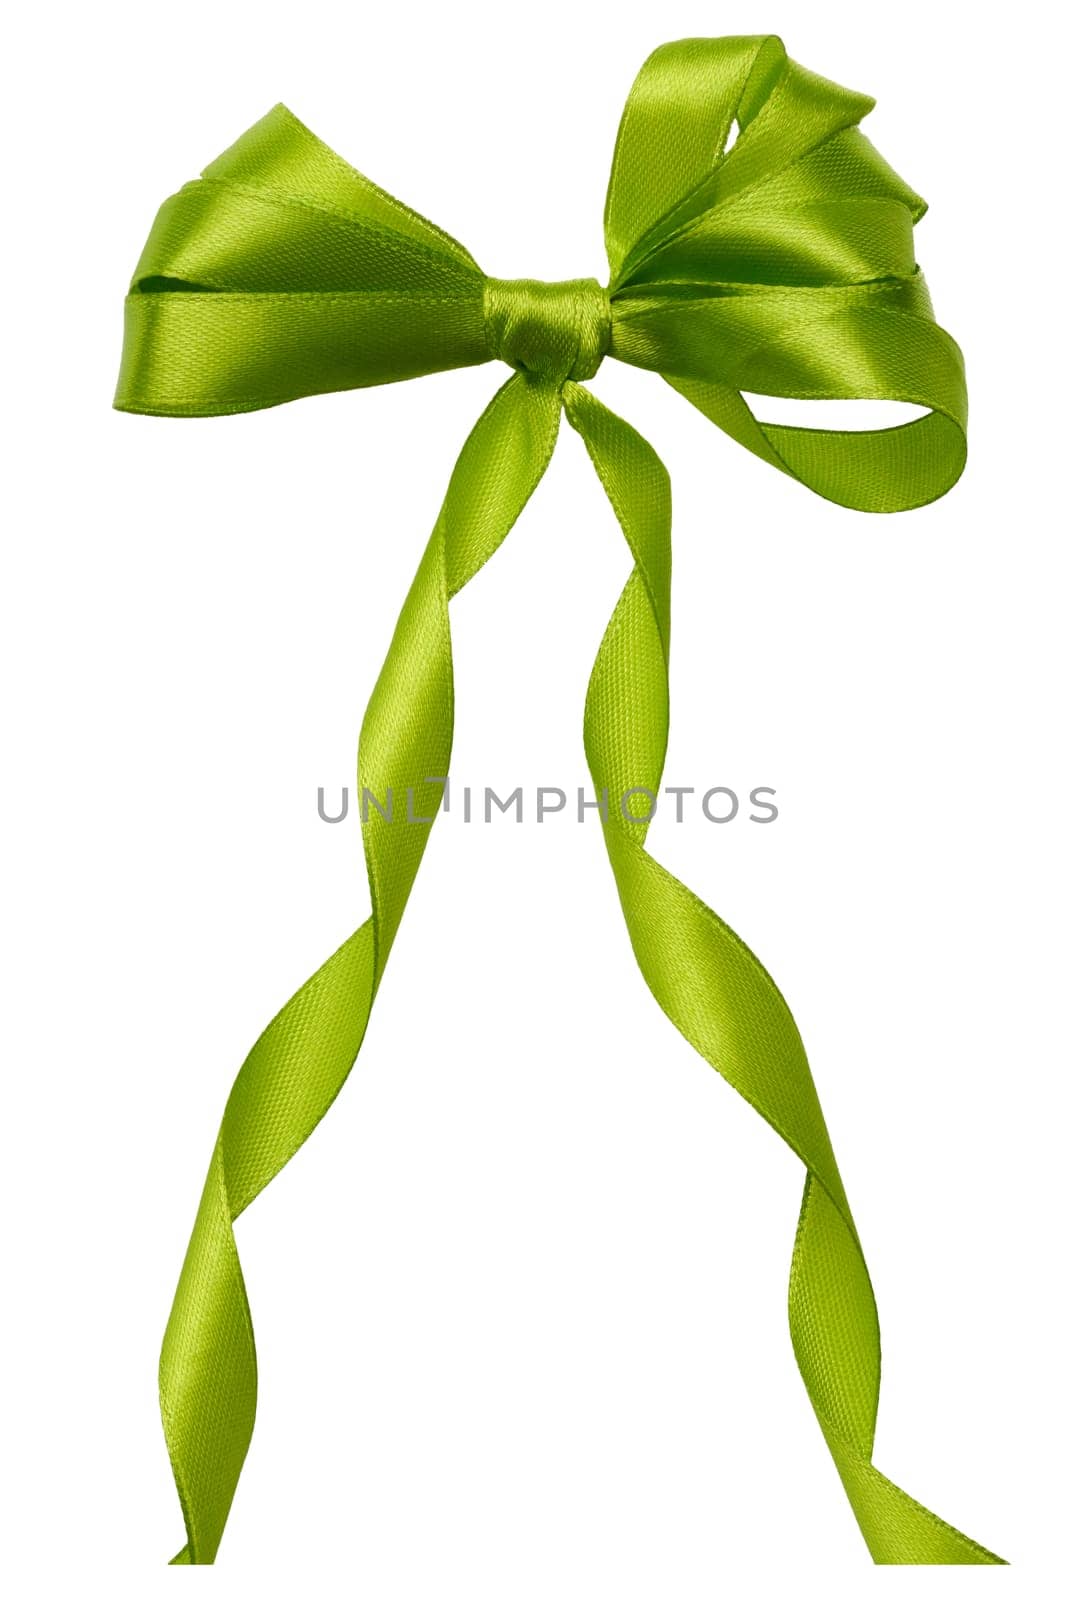 Tied bow from green silk ribbon on isolated background, decor for gift by ndanko